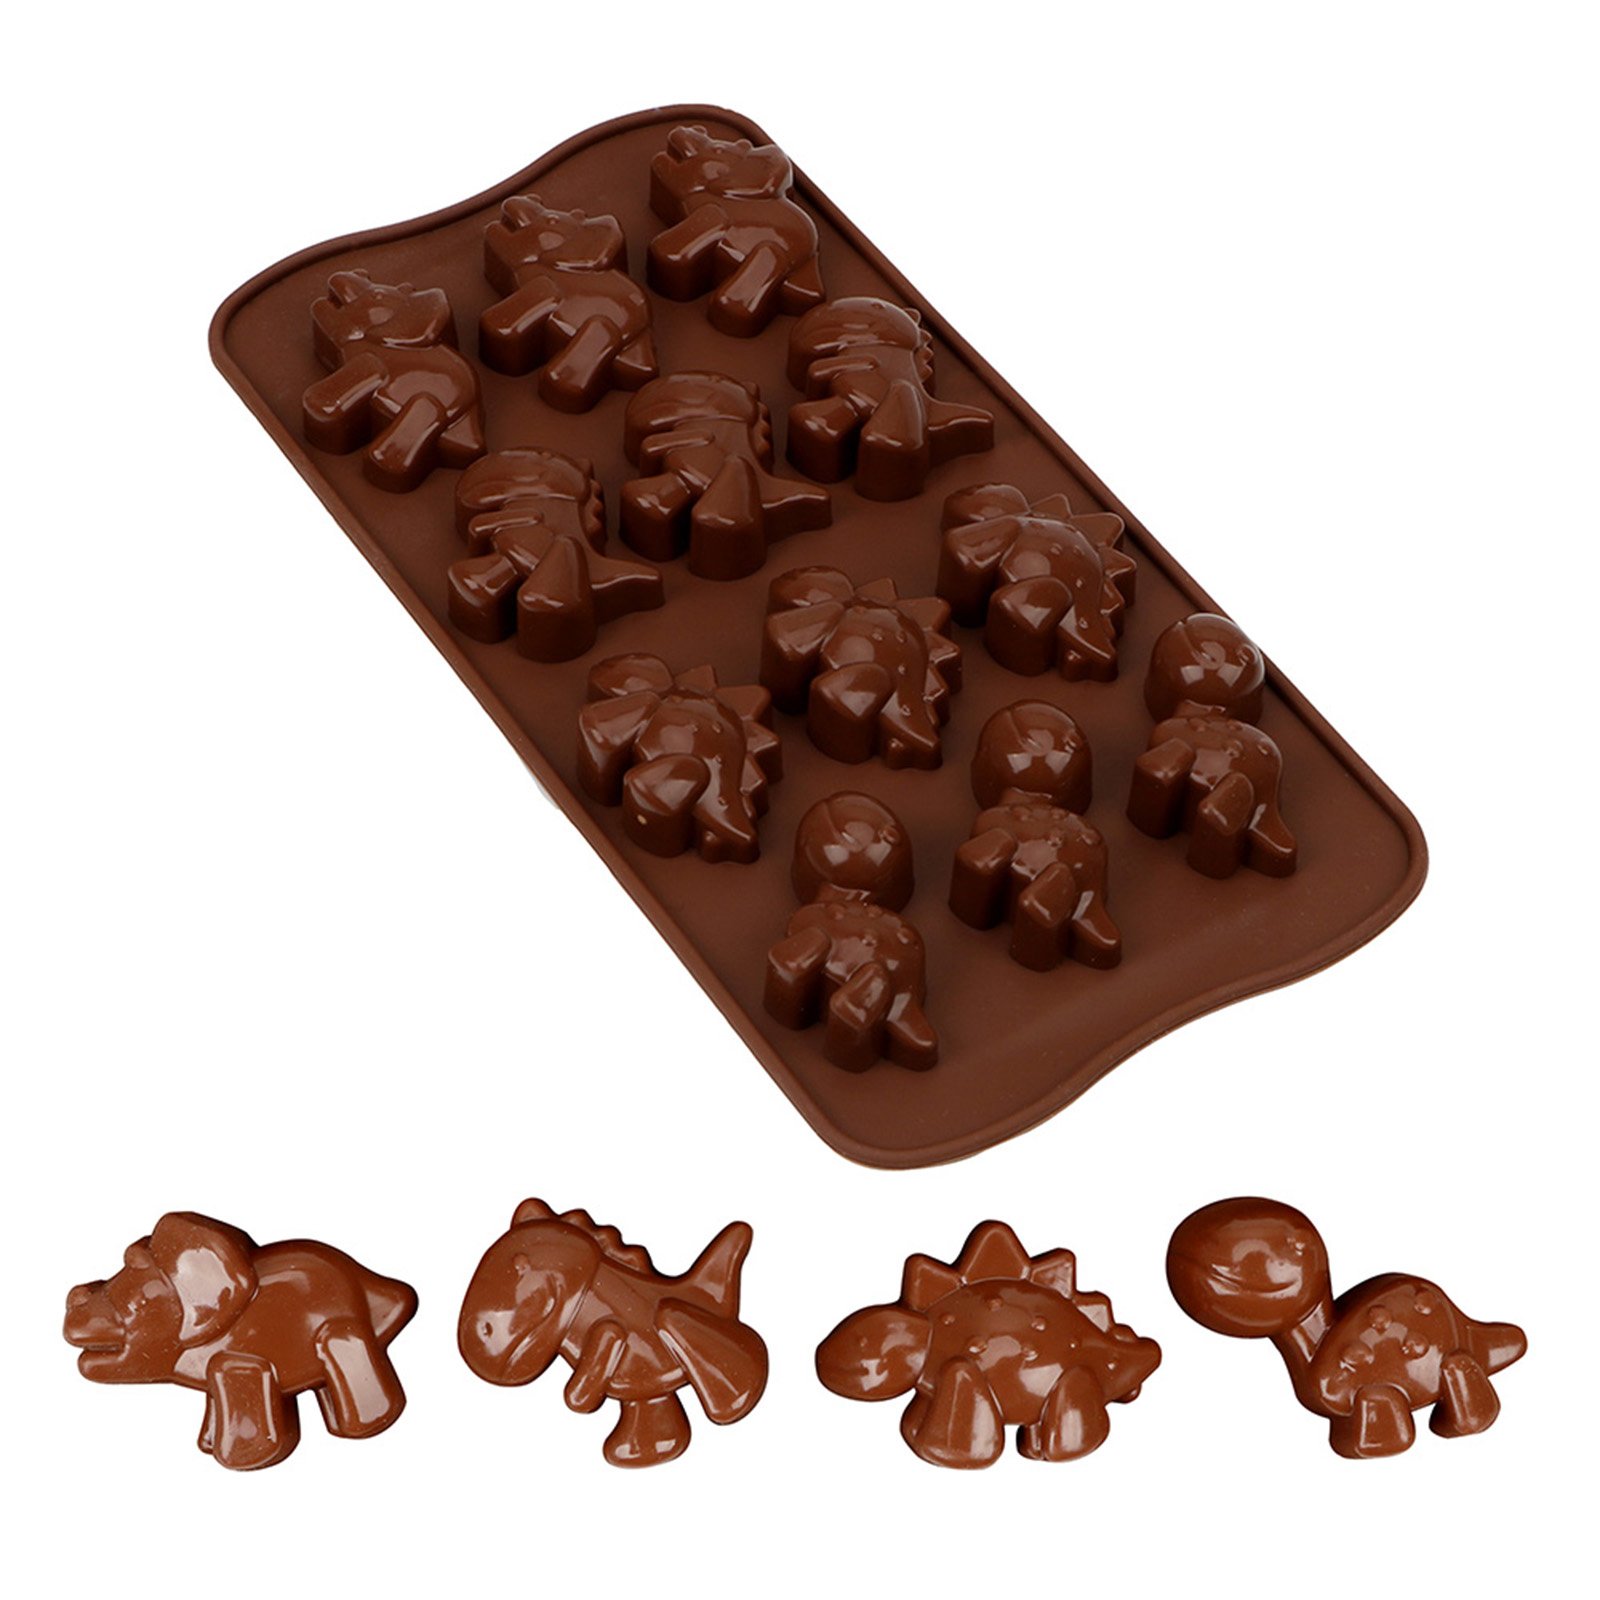 webake Dino Baking Mould Dinosaur Cake Mould Silicone Jelly Moulds Pack of  2 Pudding Moulds Silicone Mould Chocolate Mould for Chokolade, Sweets,  Jelly, Ice Cub… in 2023